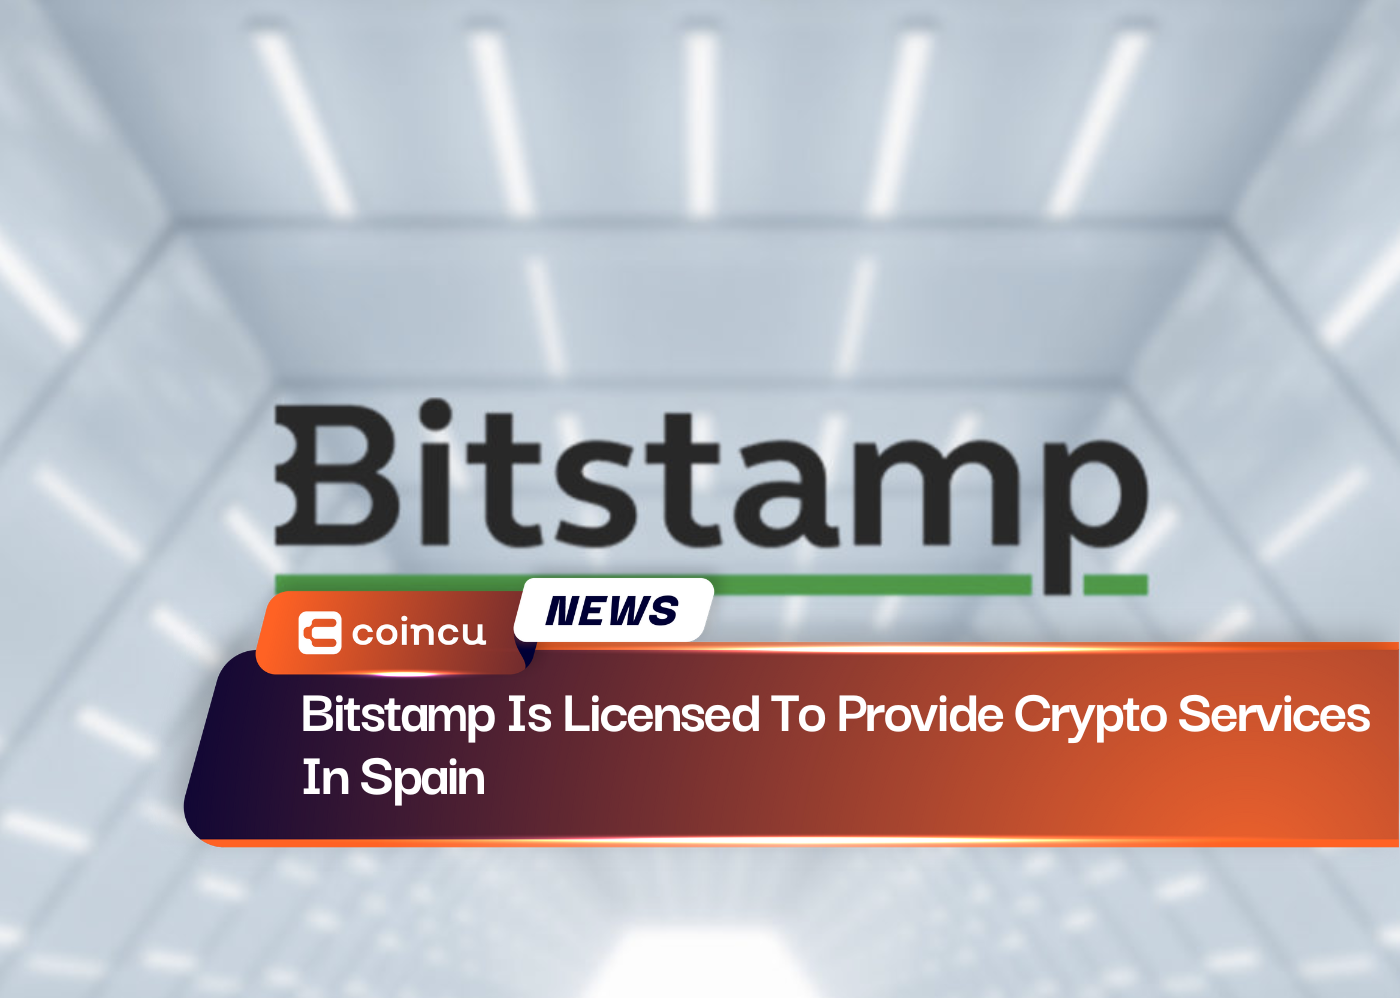 Bitstamp Is Licensed To Provide Crypto Services In Spain